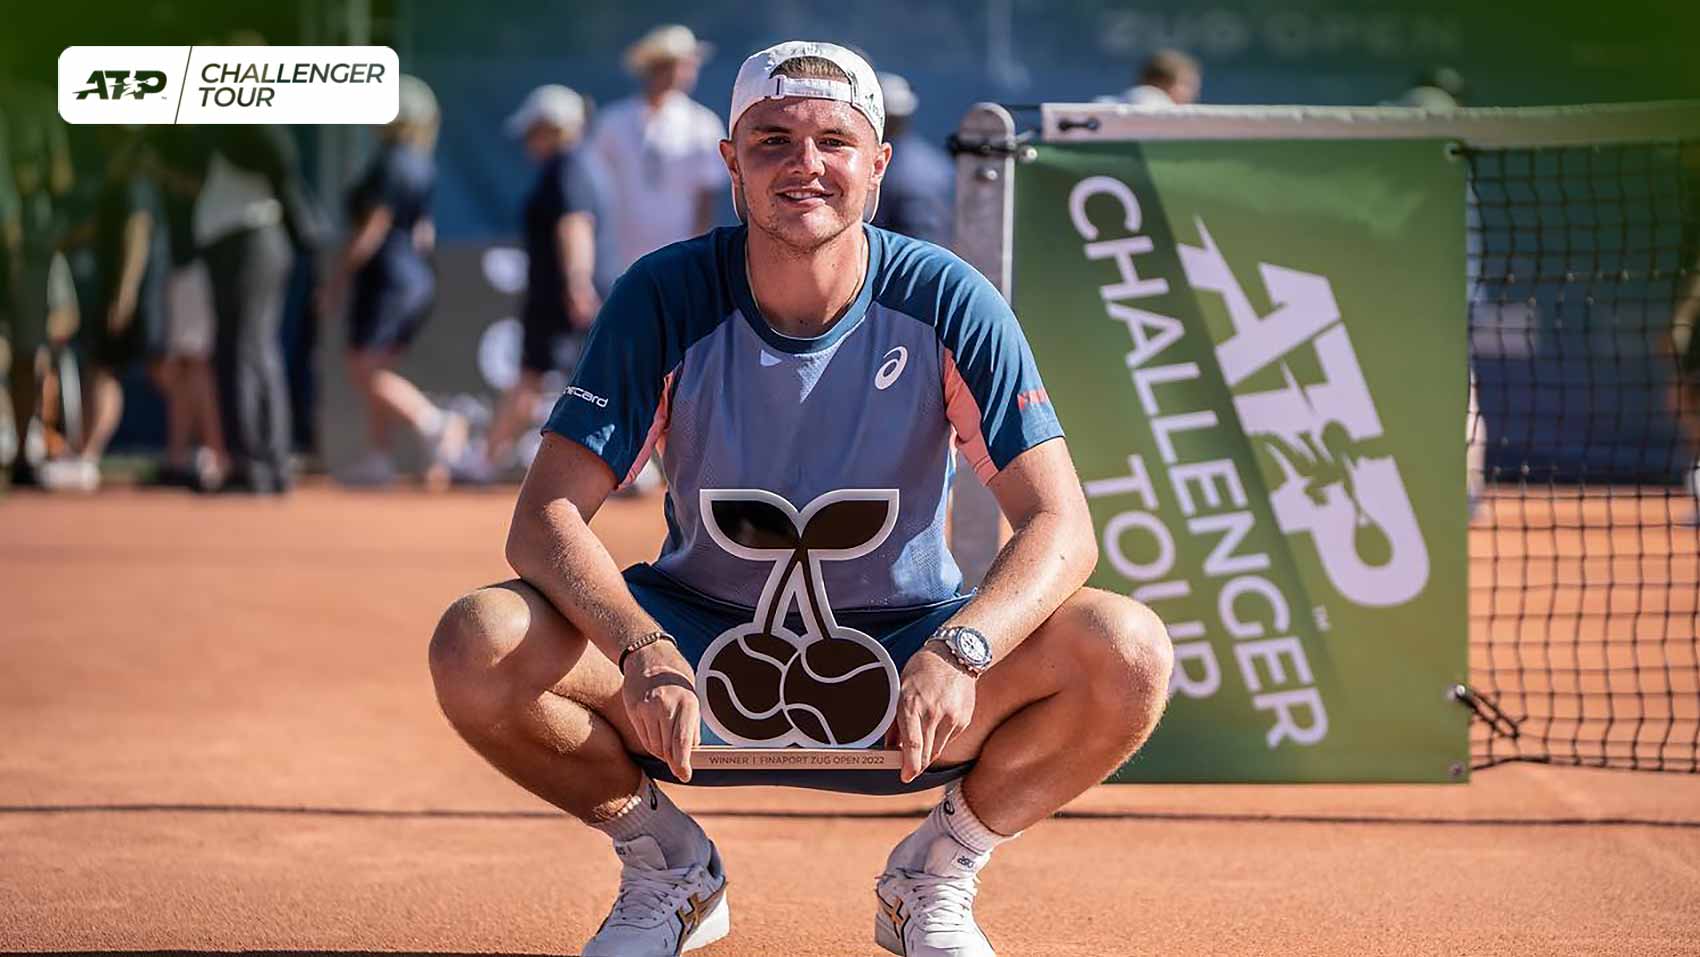 Dominic Stricker claims his second ATP Challenger Tour title of 2022.